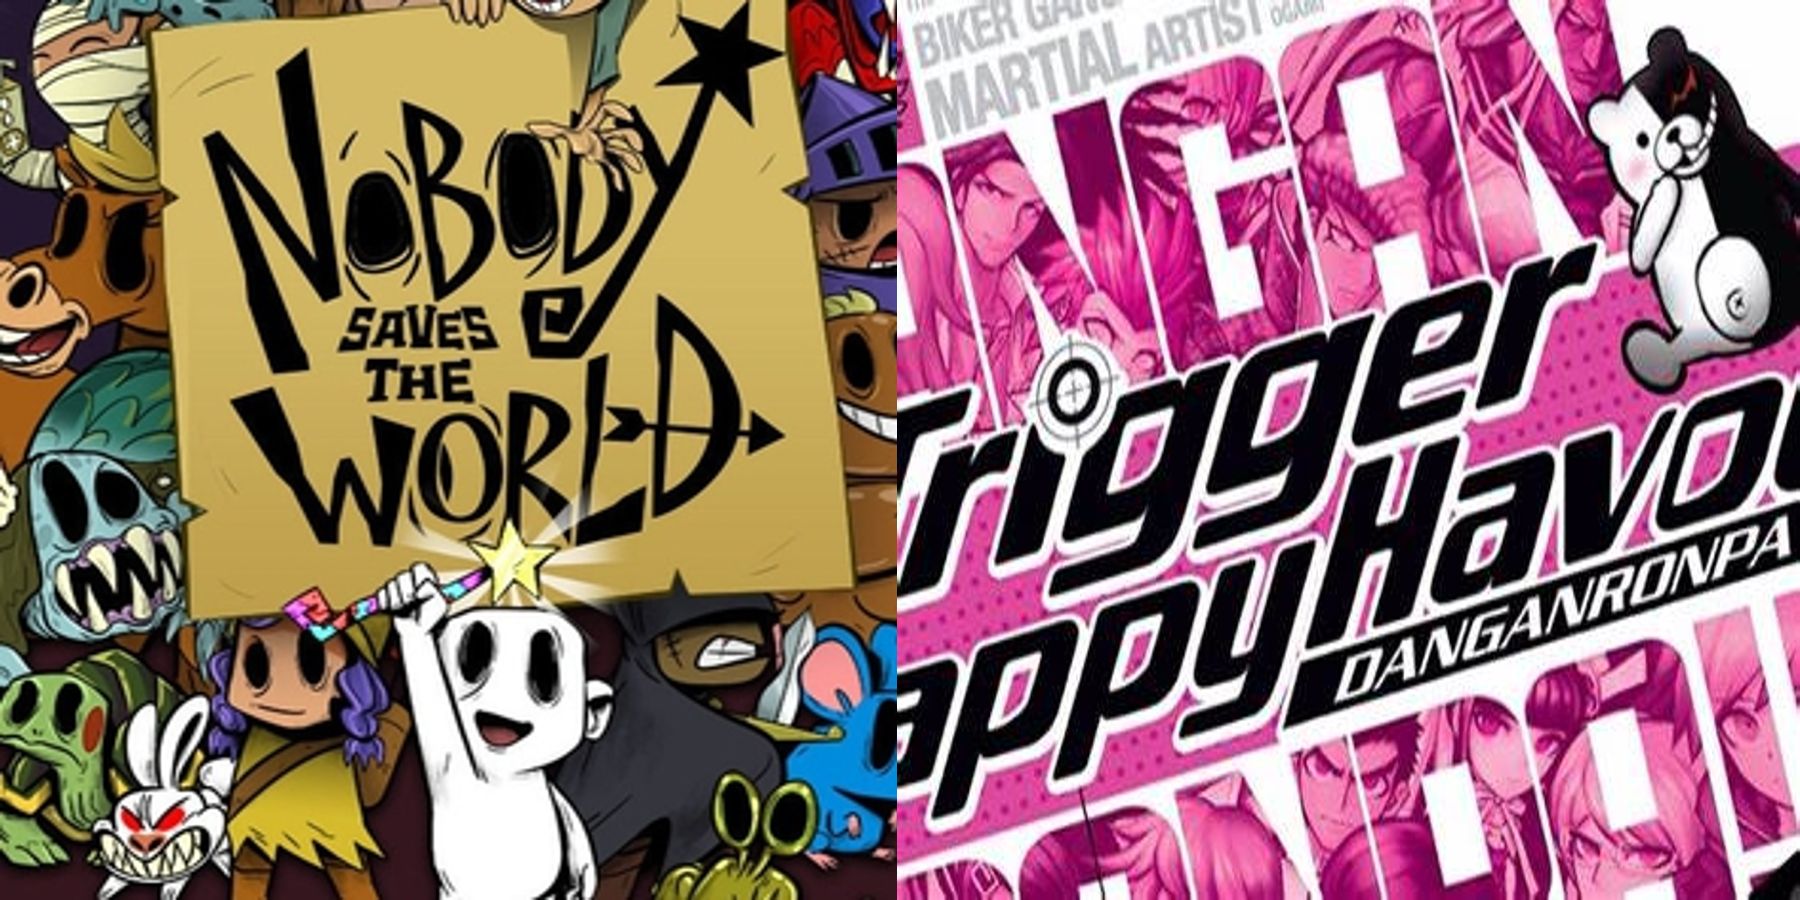 The cover art for Nobody Saves the World, Danganronpa